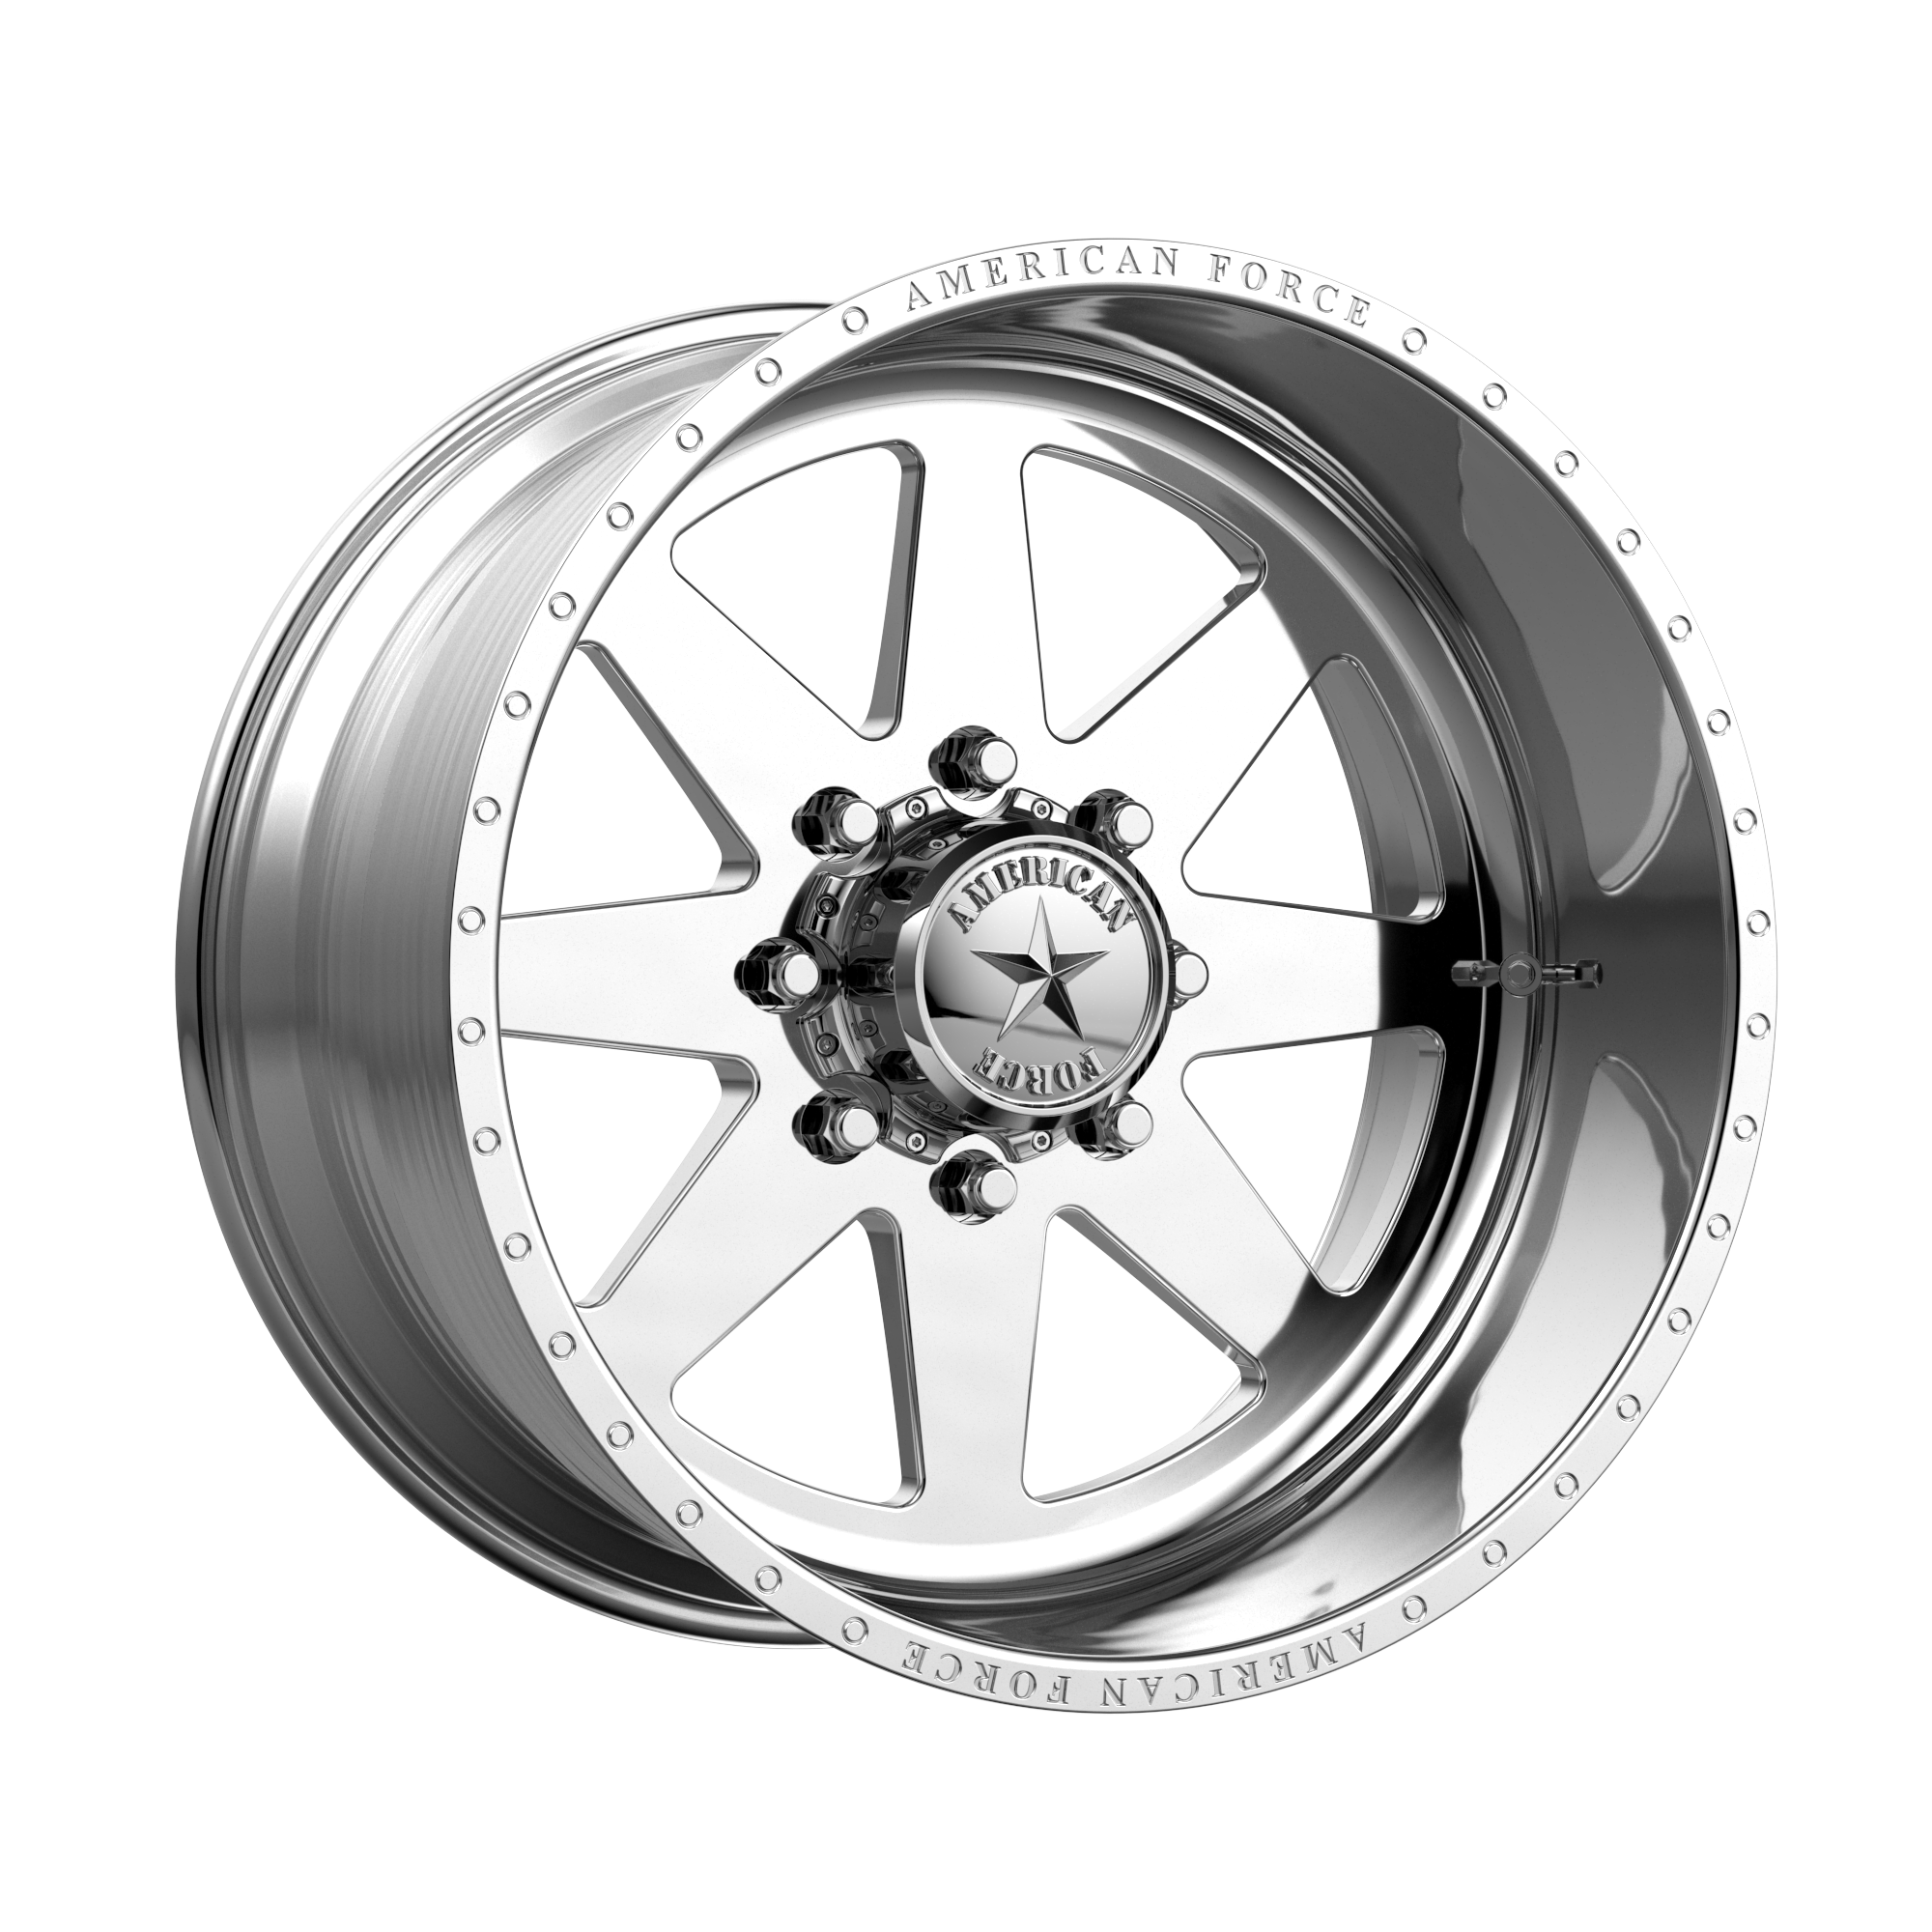 INDEPENDENCE SS 20x12 6x139.70 POLISHED (-40 mm) - Tires and Engine Performance